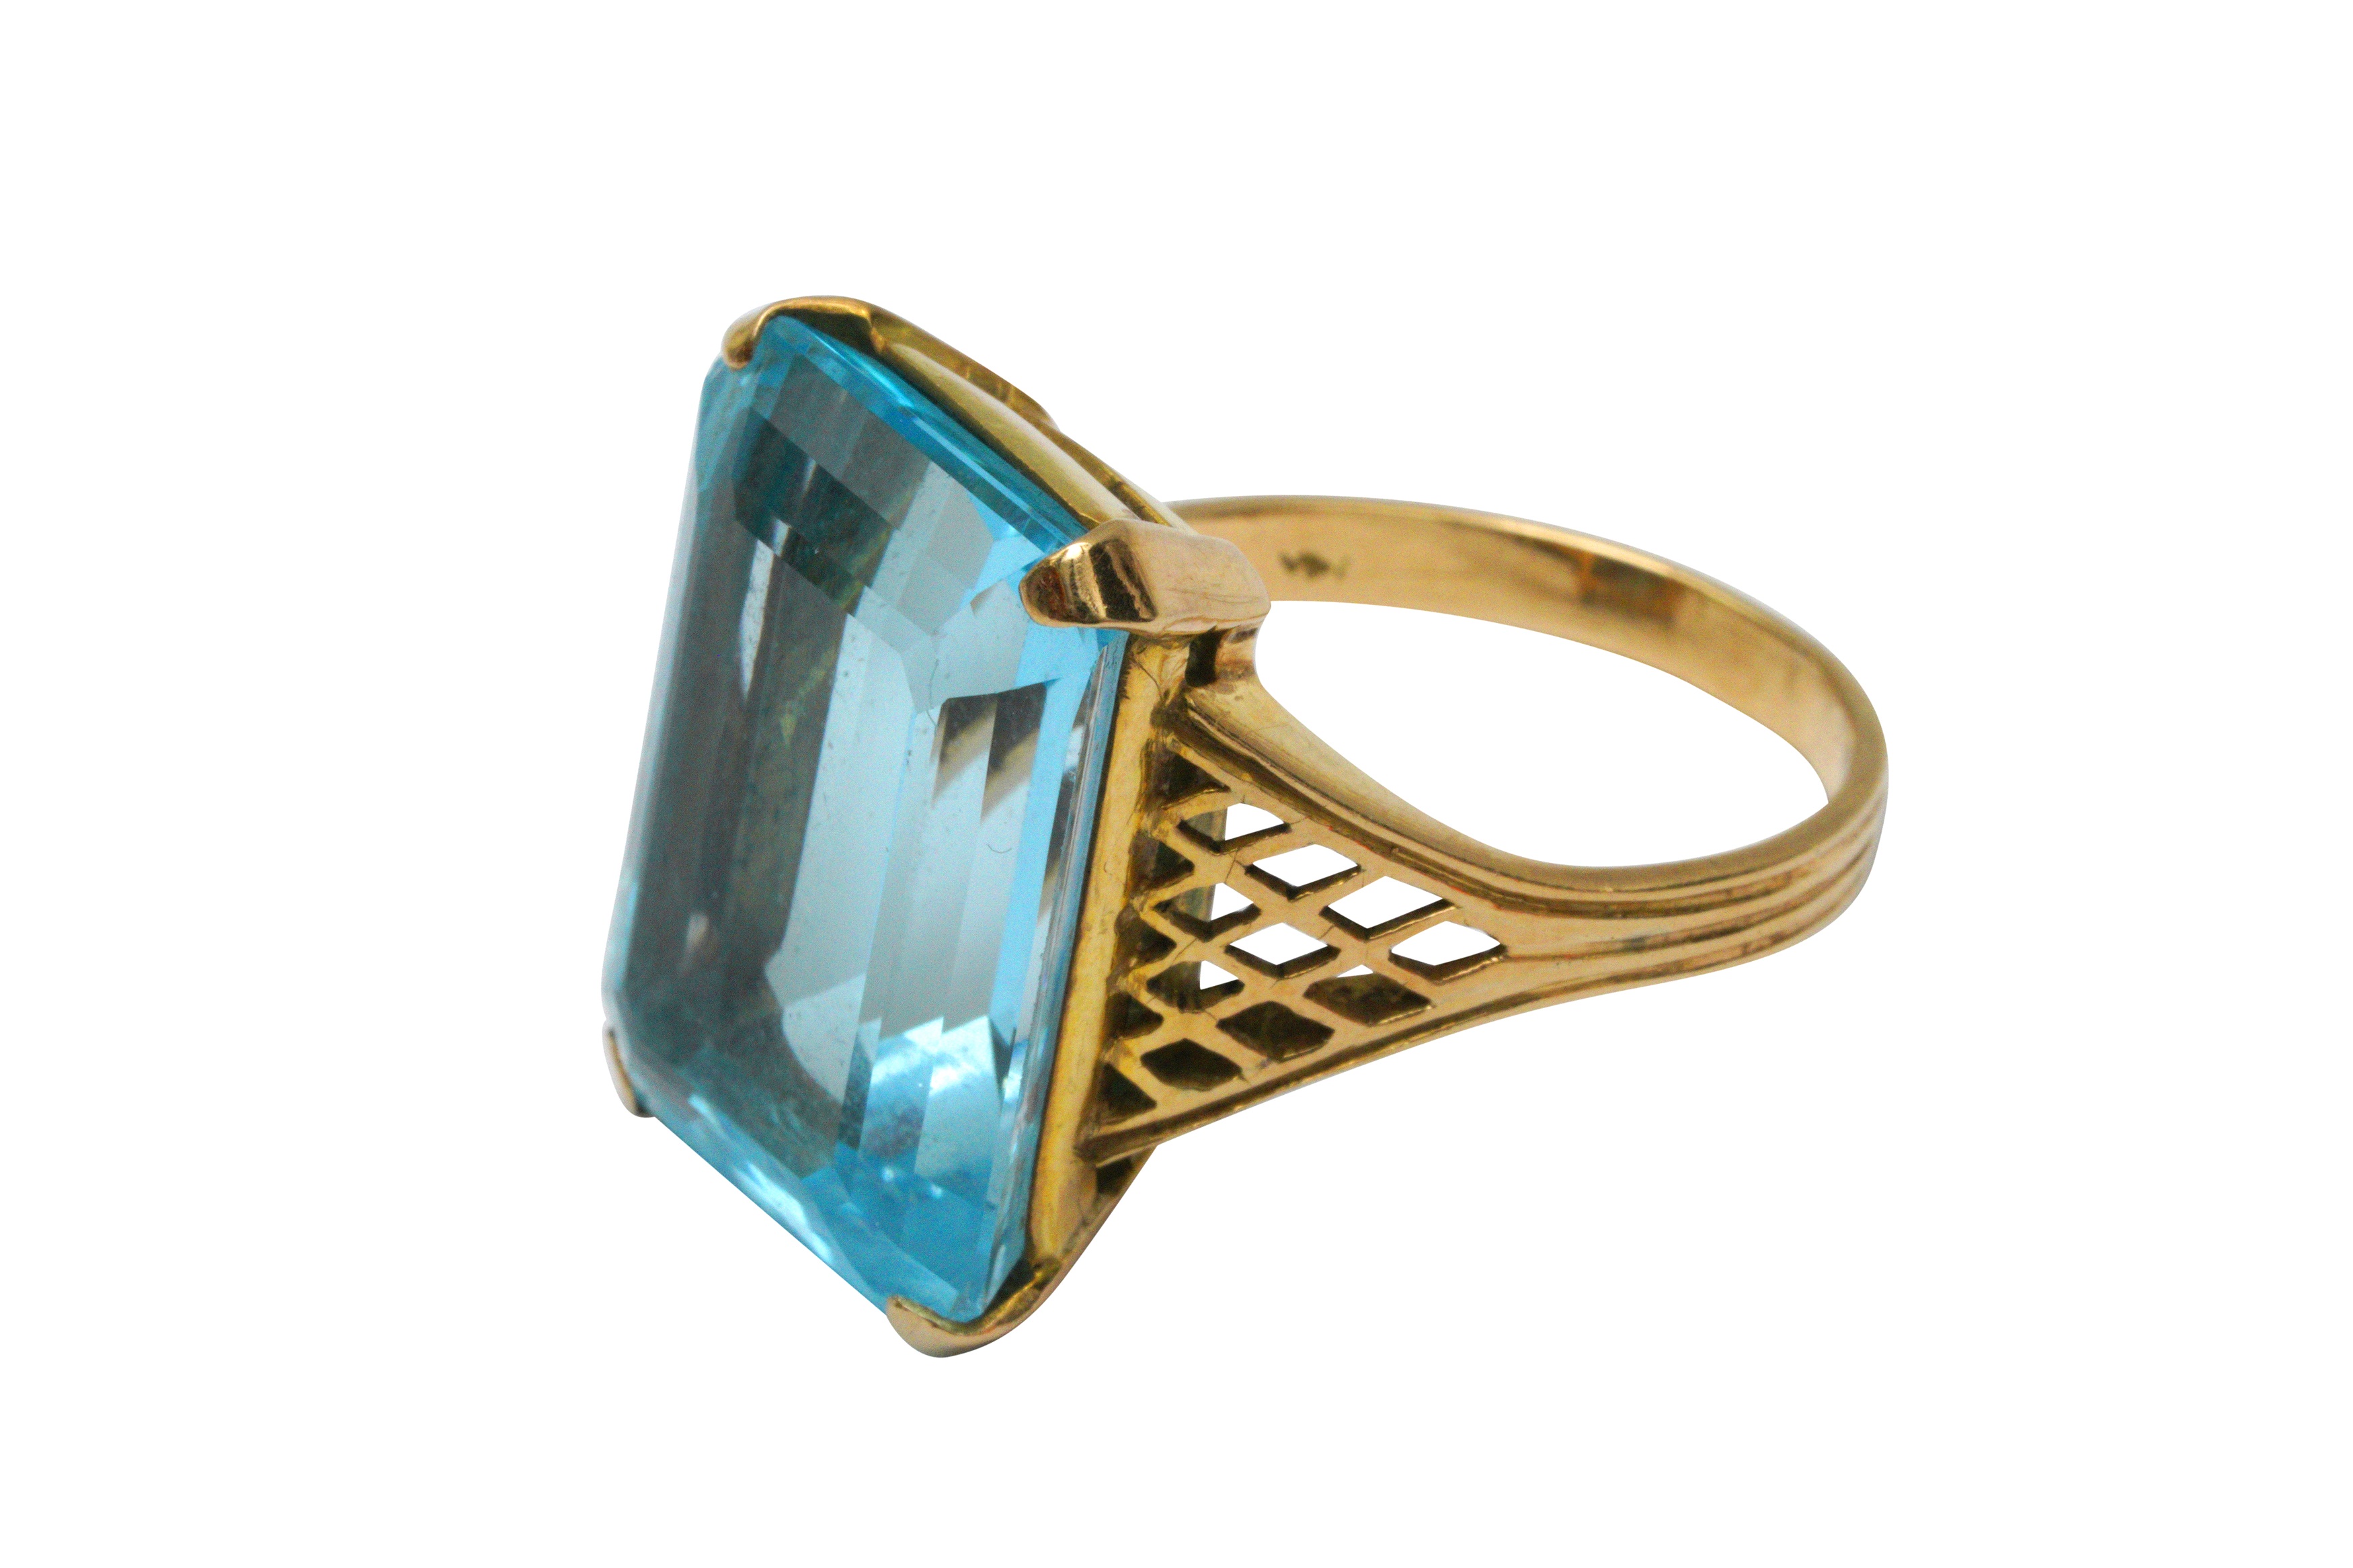 A BLUE TOPAZ DRESS RING - Image 2 of 2